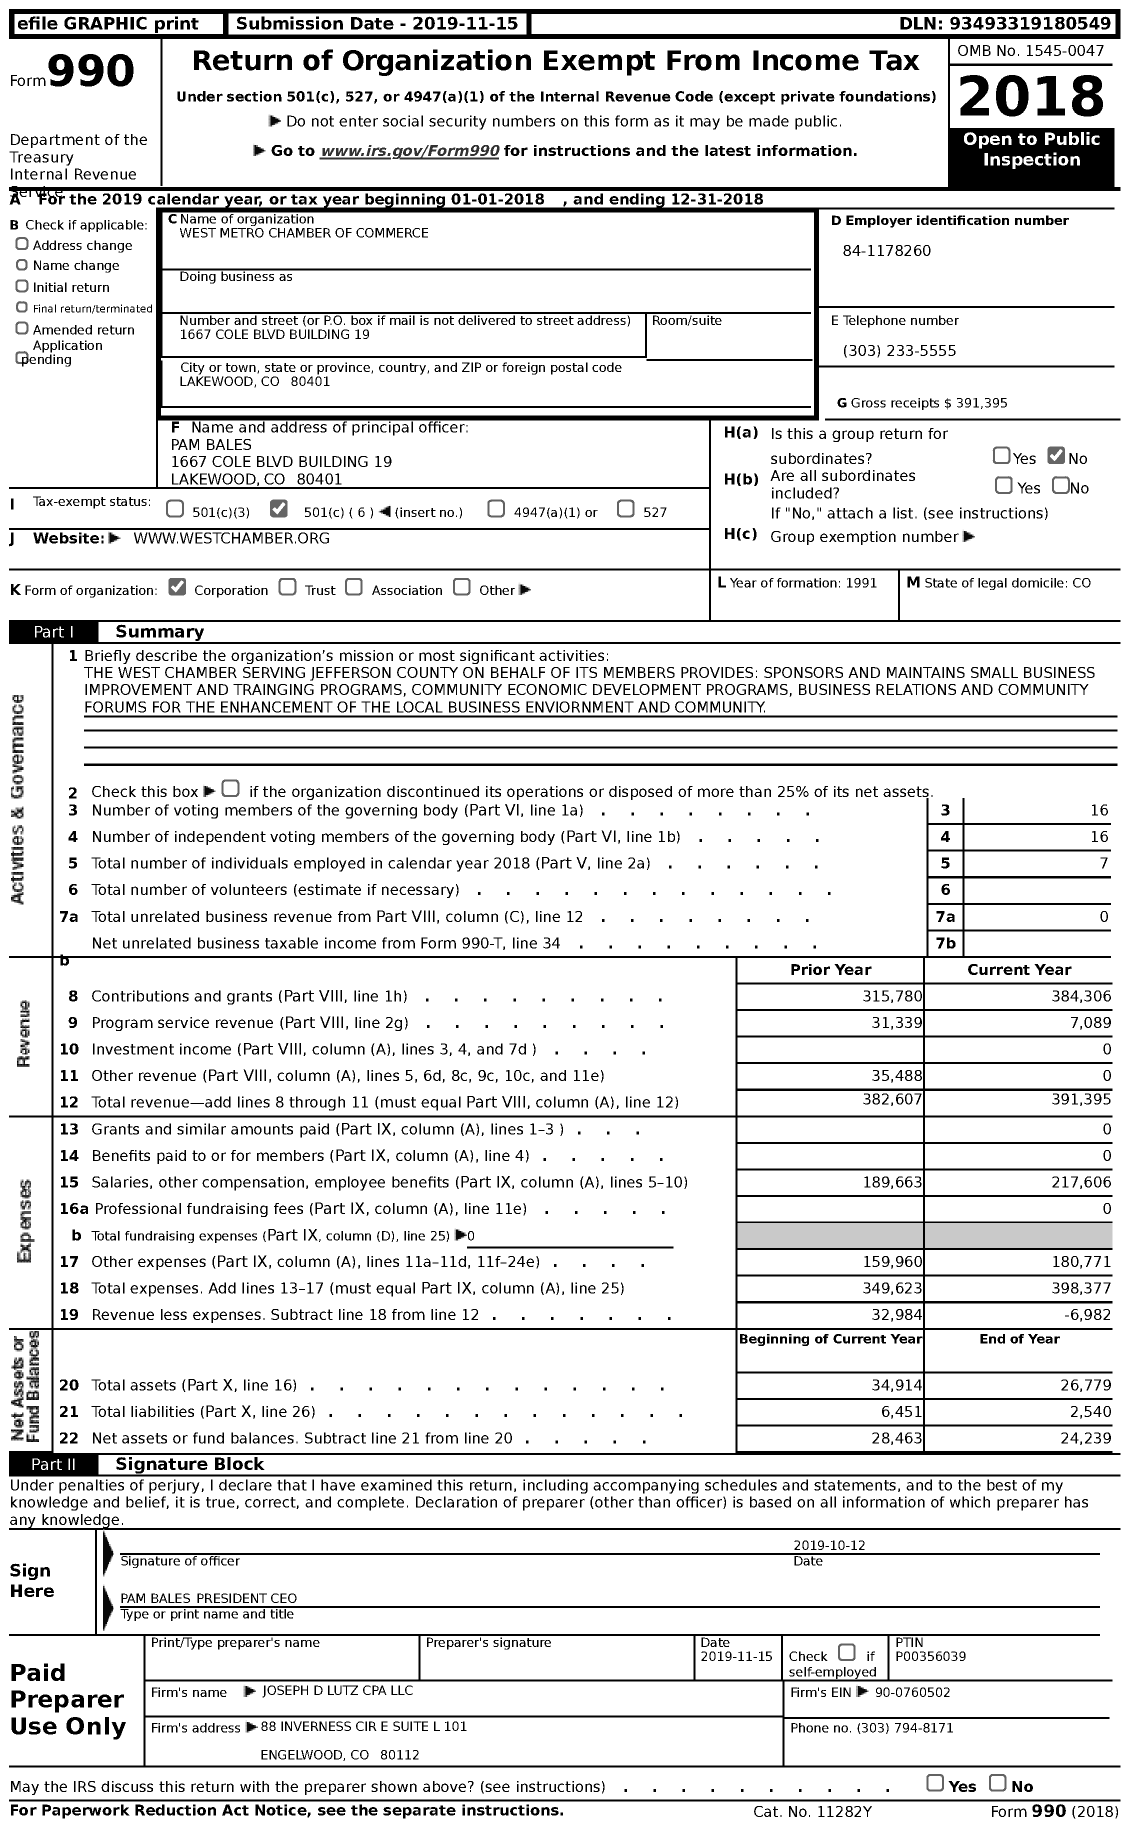 Image of first page of 2018 Form 990 for West Metro Chamber of Commerce